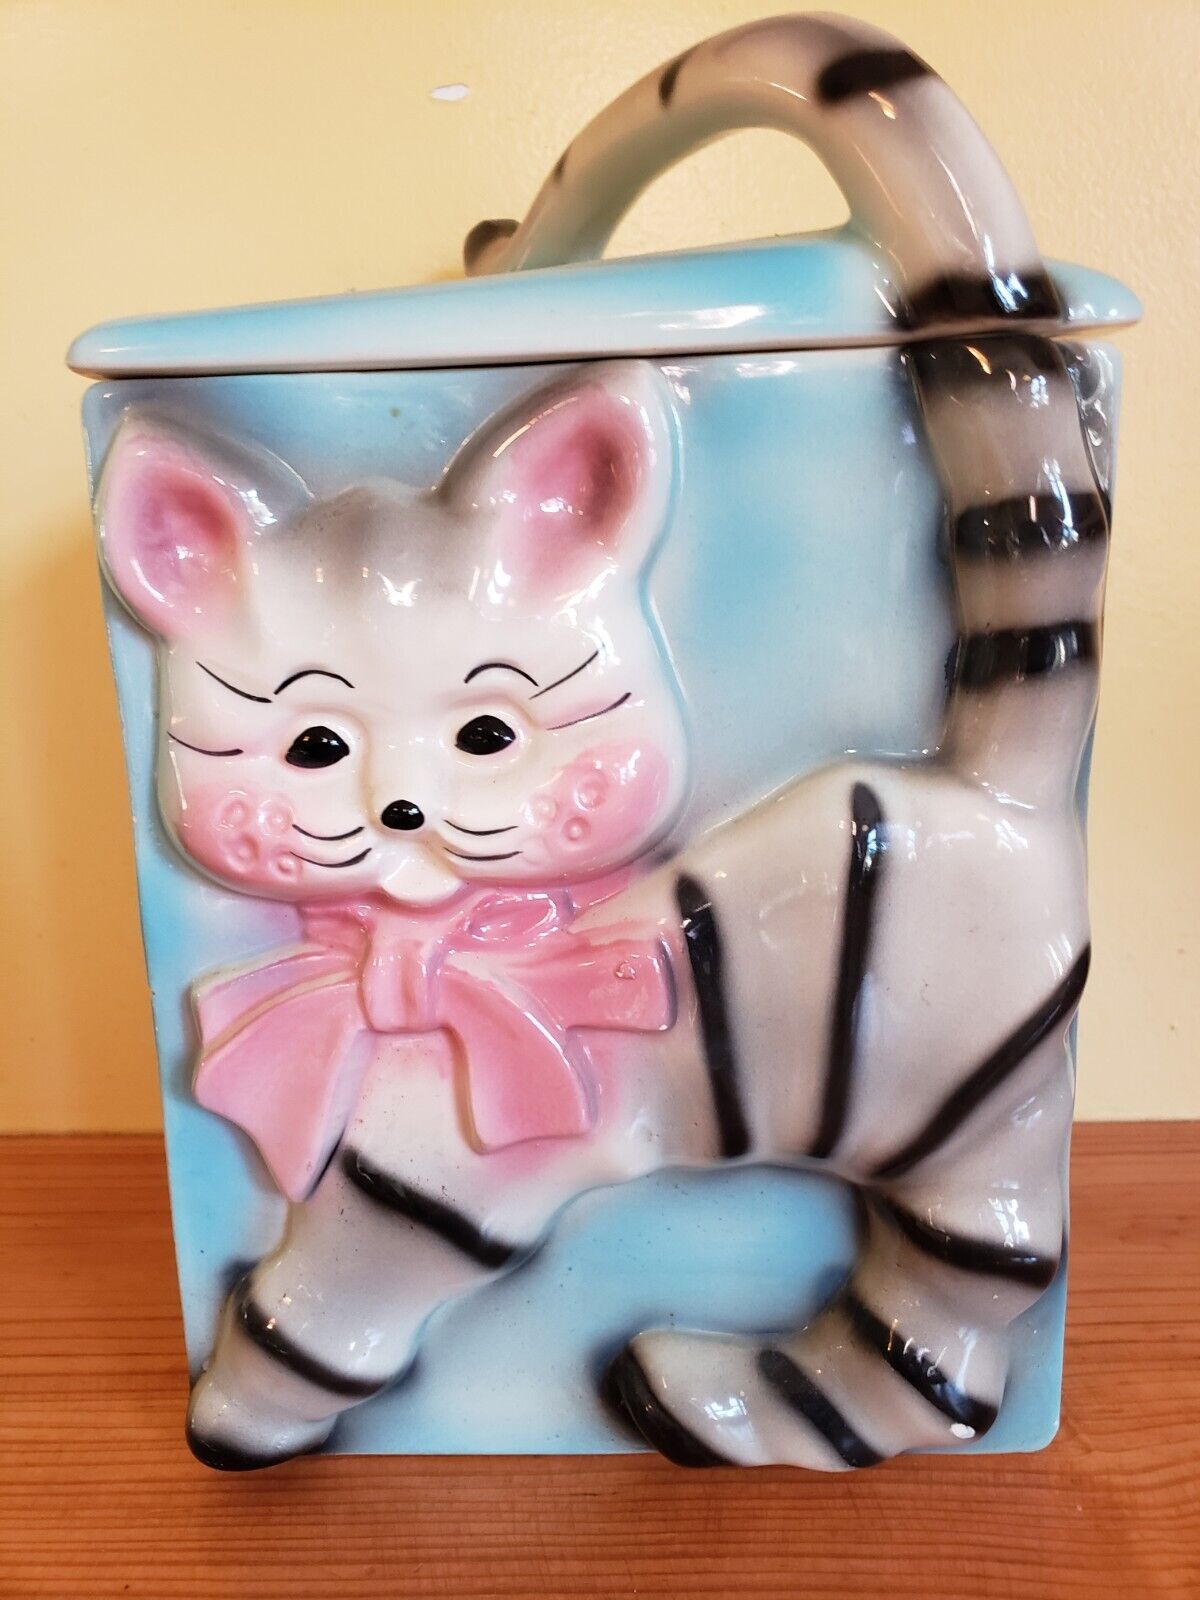 Vintage 1950s Cat Cookie Jar MADE IN USA Kitschy Cottage Kitty -Tail As Lid